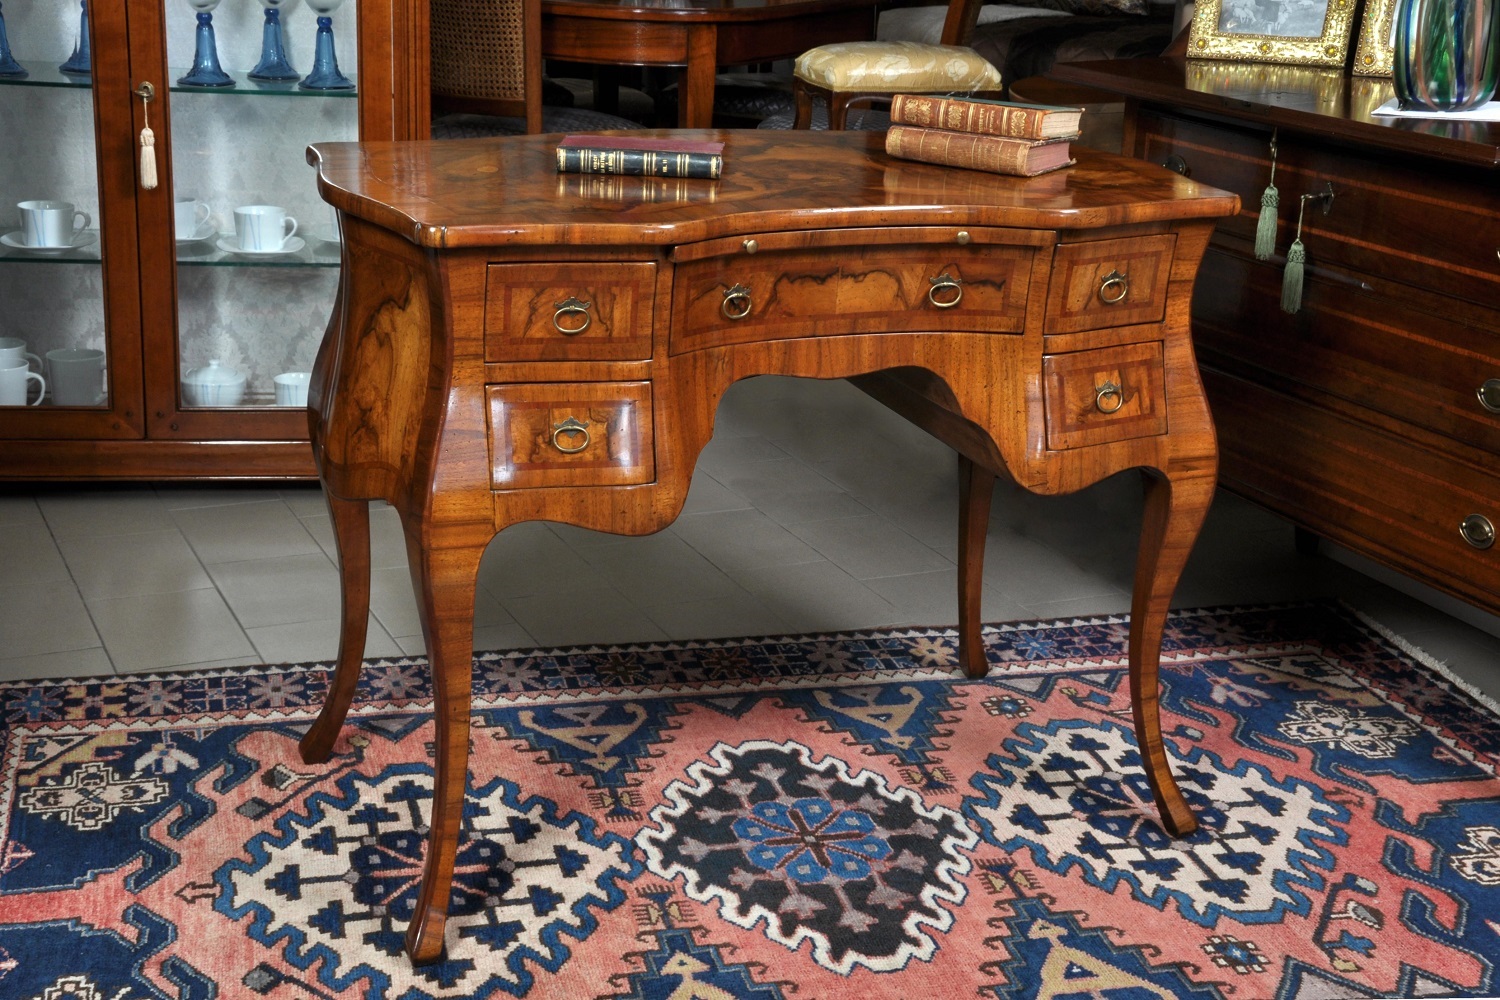 important Venetian desk of 1700 moved and shaped with inlays in walnut briar reproduction made in Italy of the original model